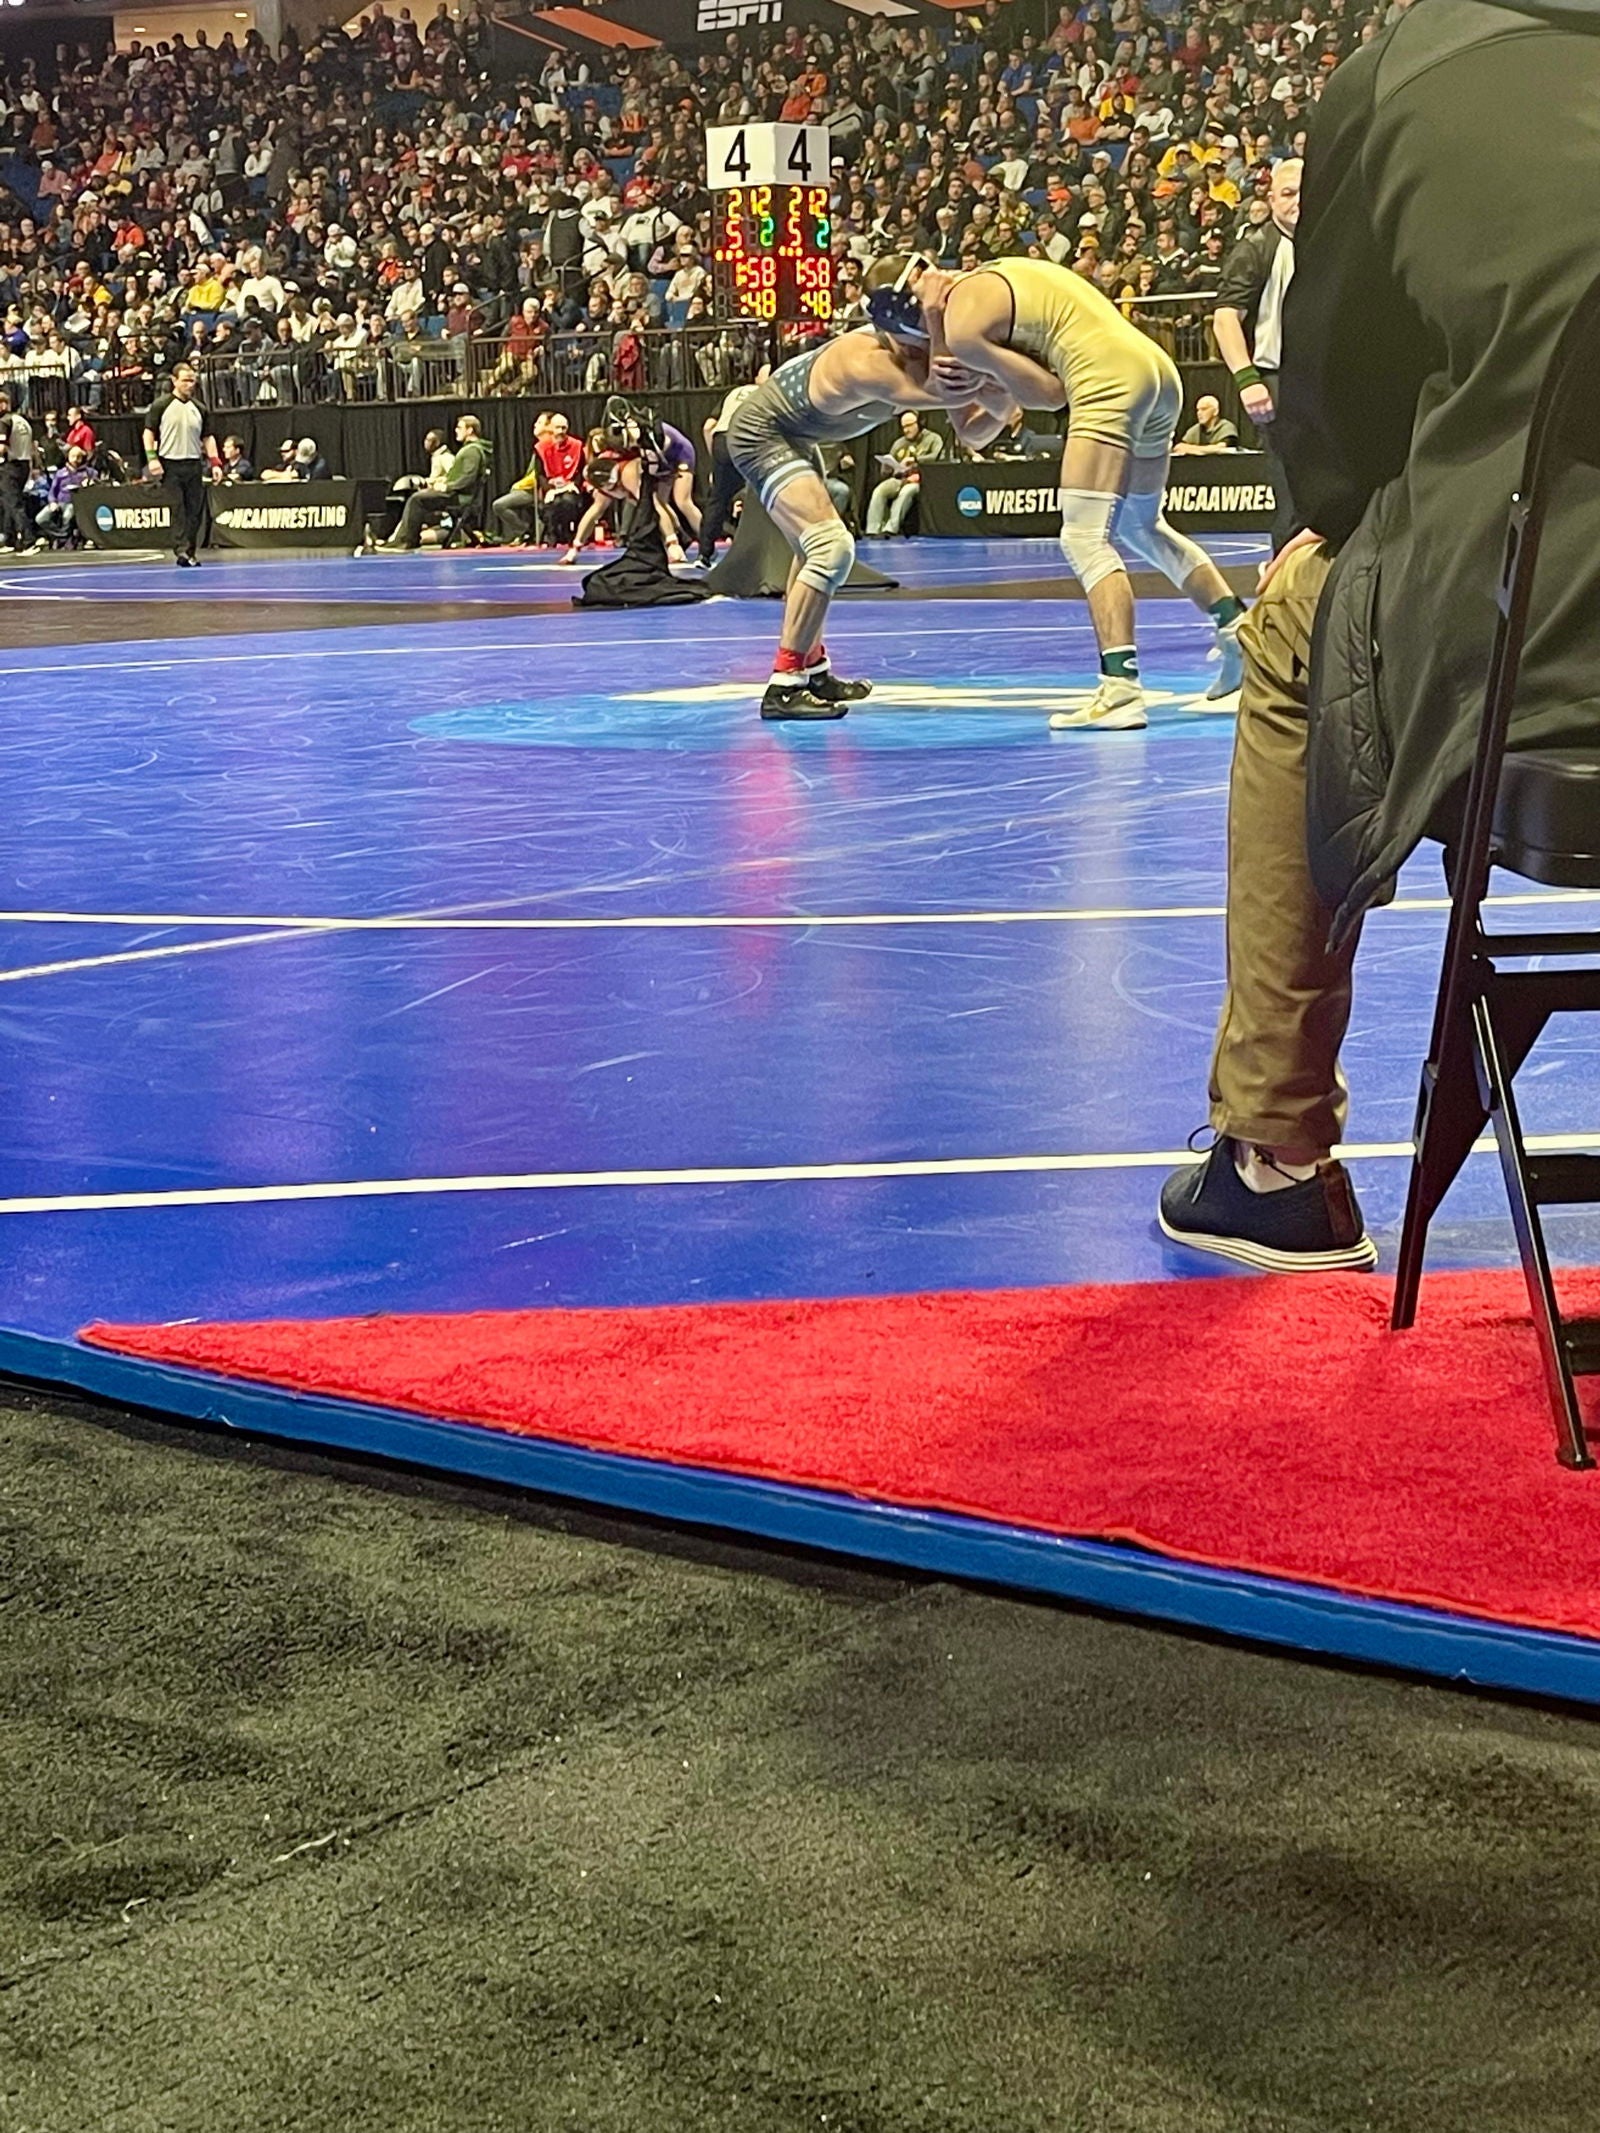 Carpet Corners - Protecting Wrestling Mats from Chair Impressions - Resilite Mats